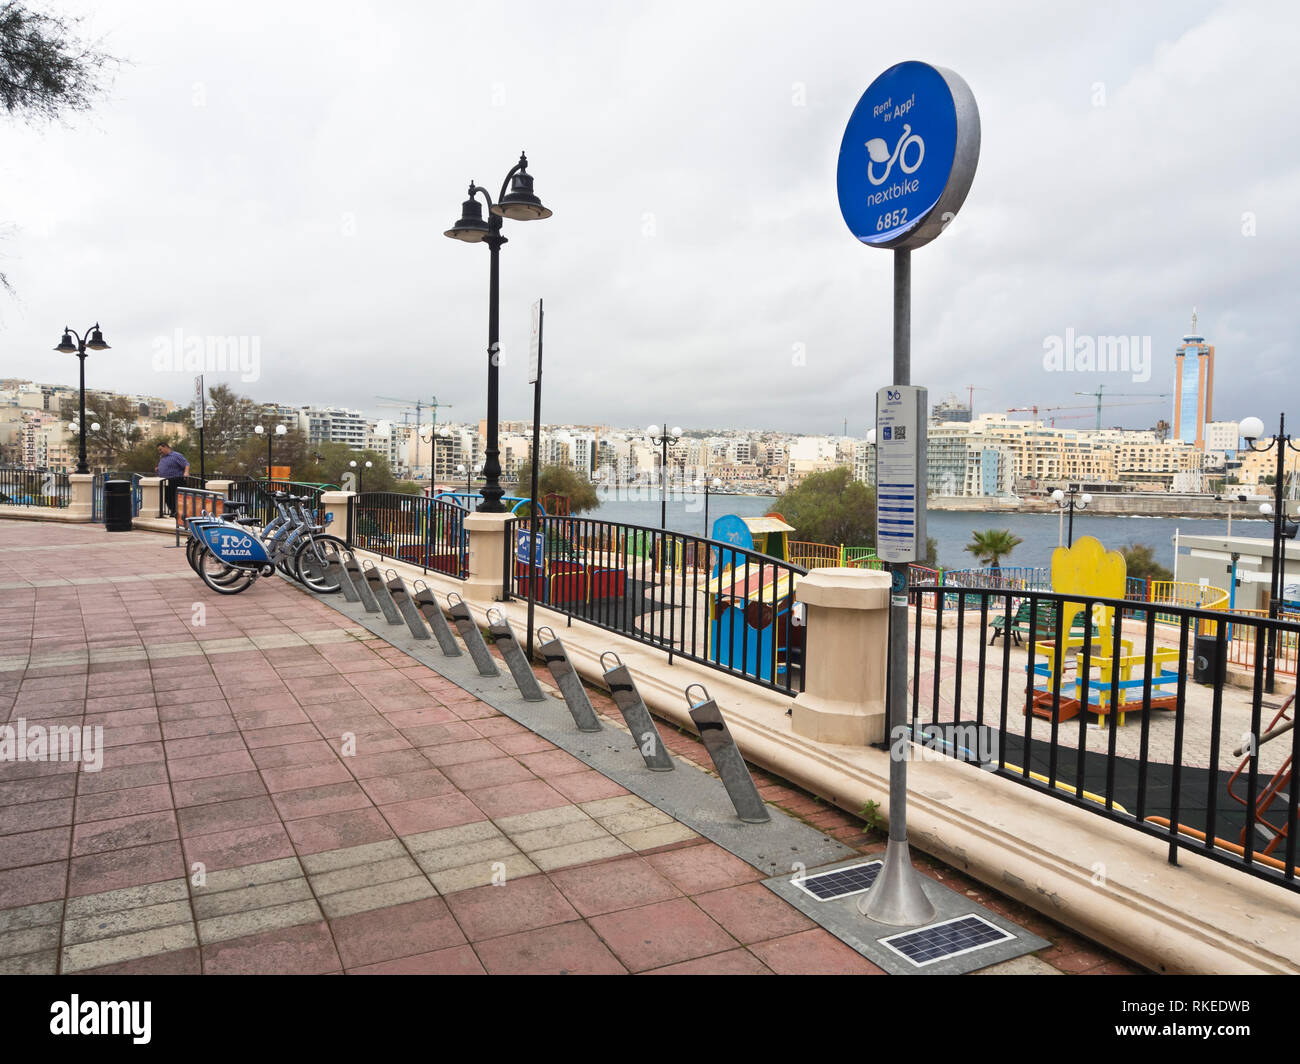 Seaside promenade in Sliema Malta with parking space for rental bikes and a children's playground Stock Photo